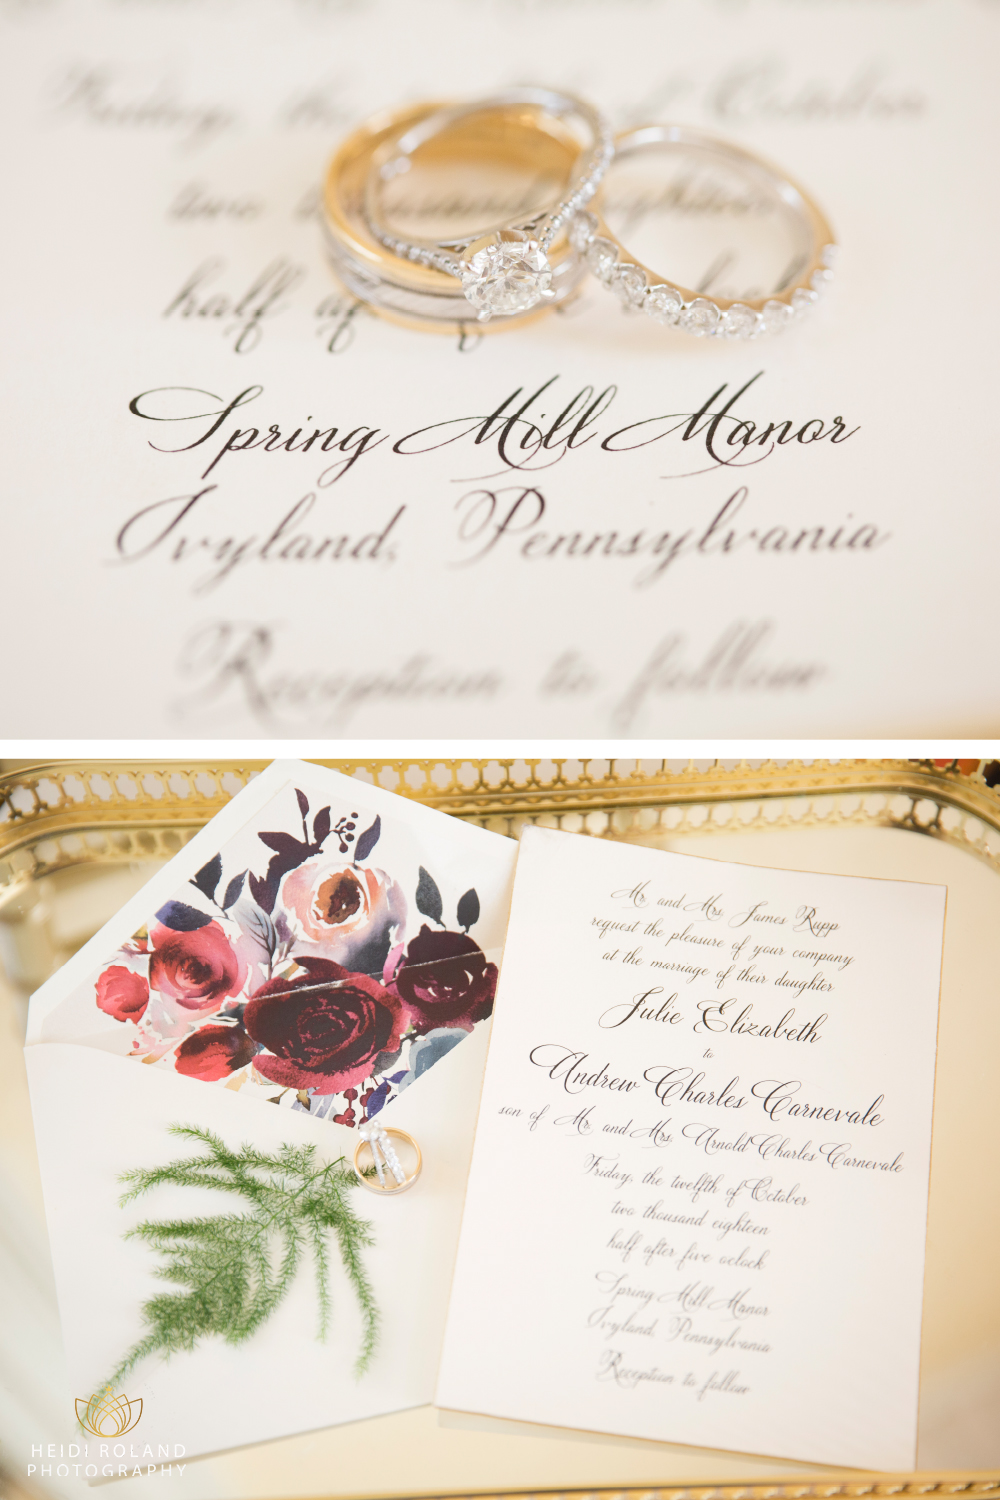 Spring Mill Manor Wedding invitation and rings